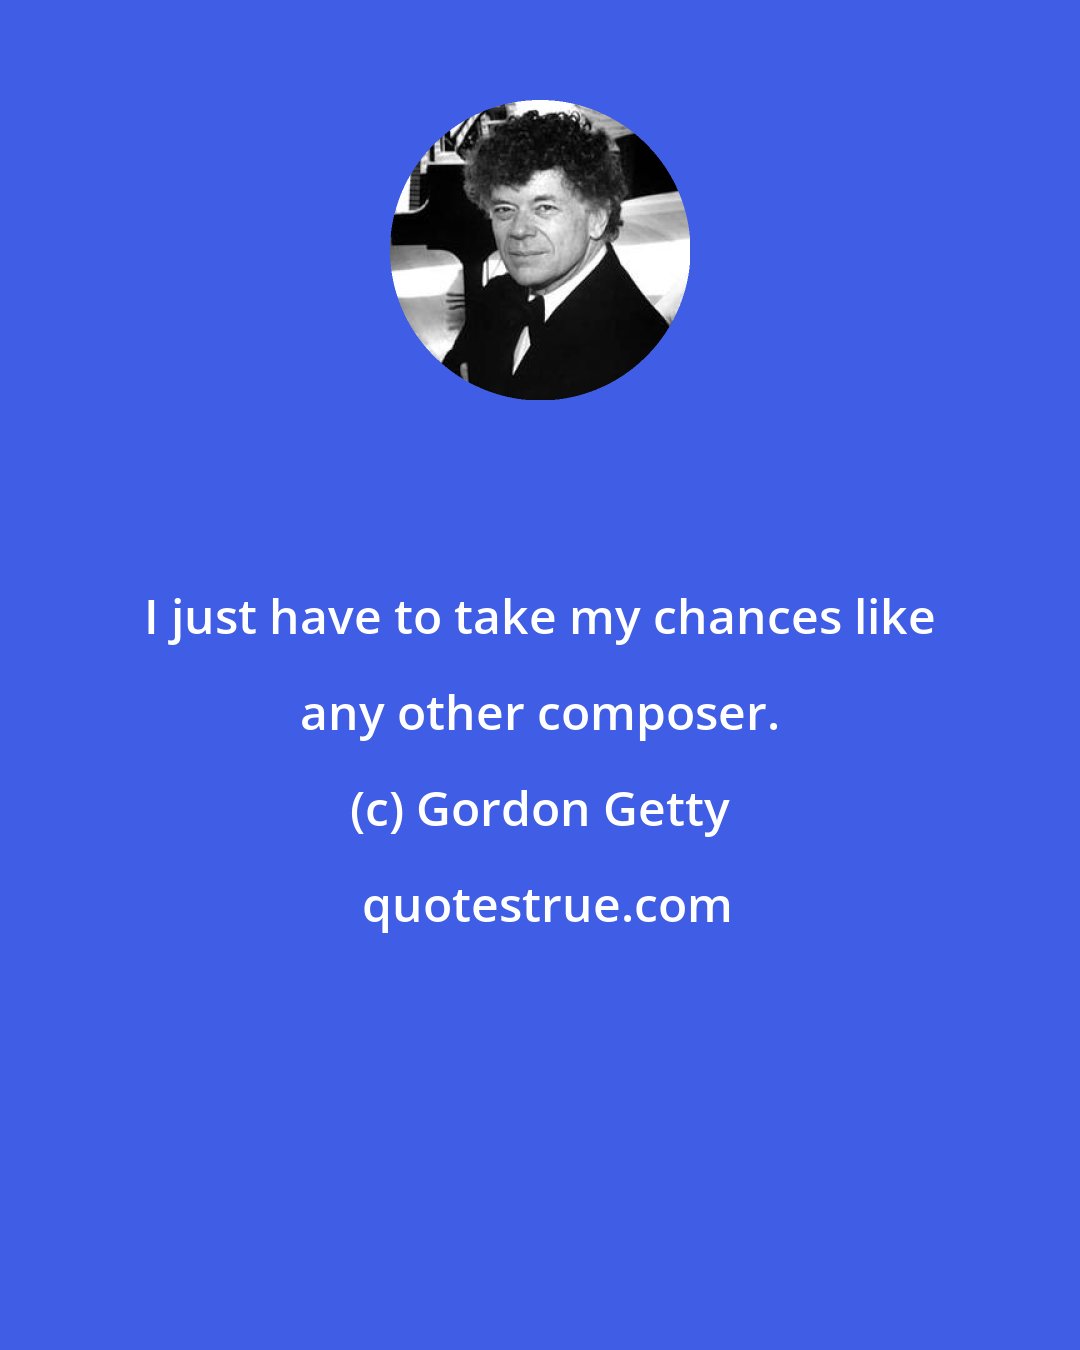 Gordon Getty: I just have to take my chances like any other composer.